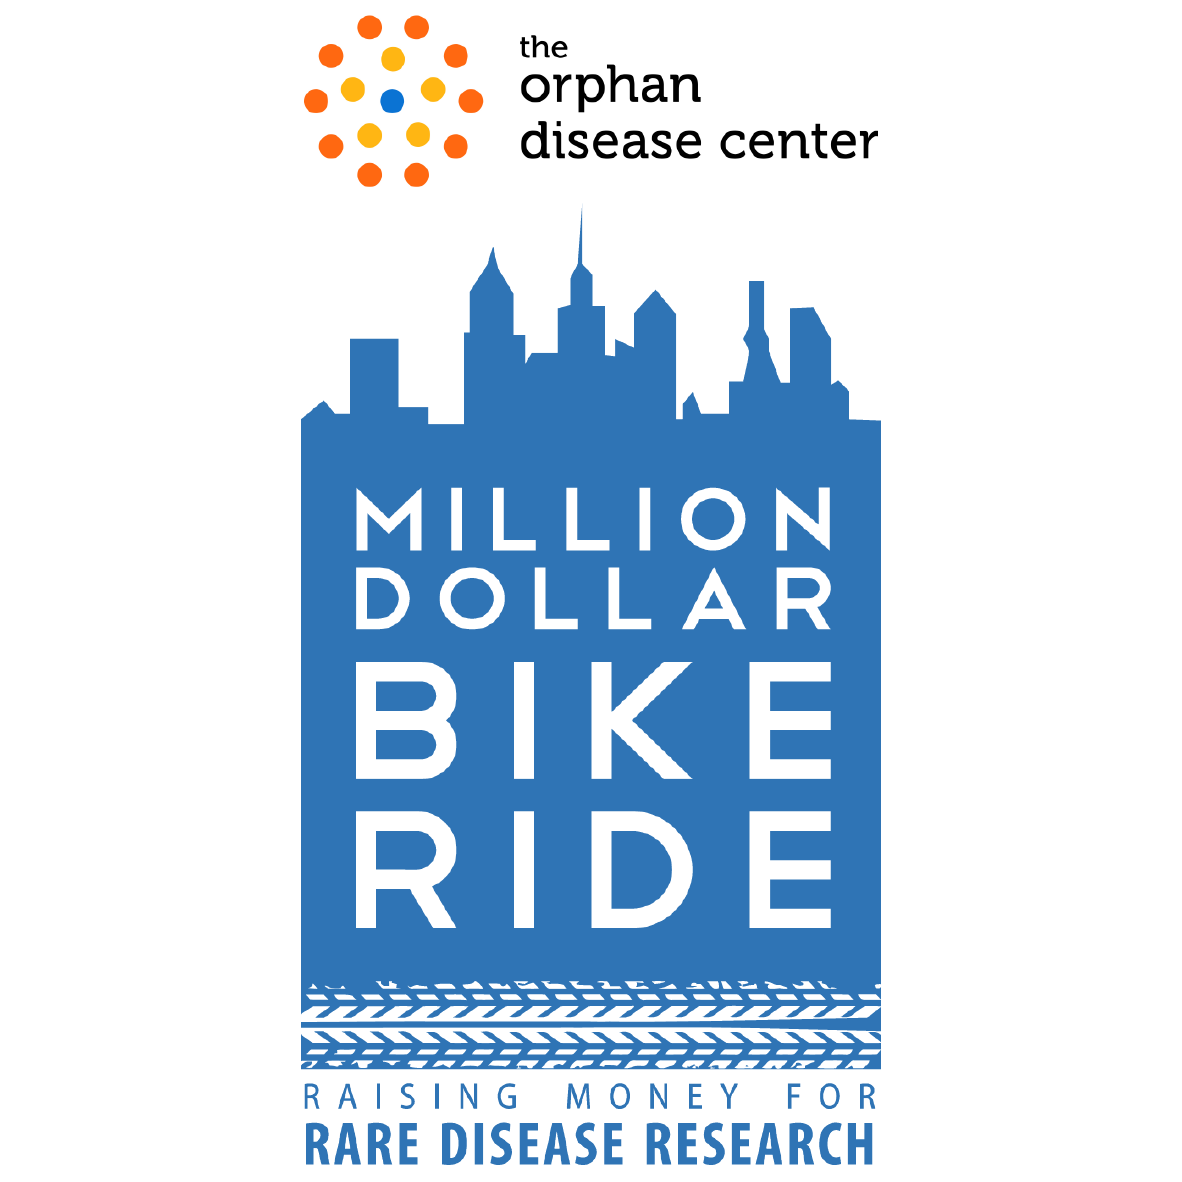 The lab receives a grant from the Million Dollar Bike Ride (MDBR) Pilot Grant Program supported by the Orphan Disease Center